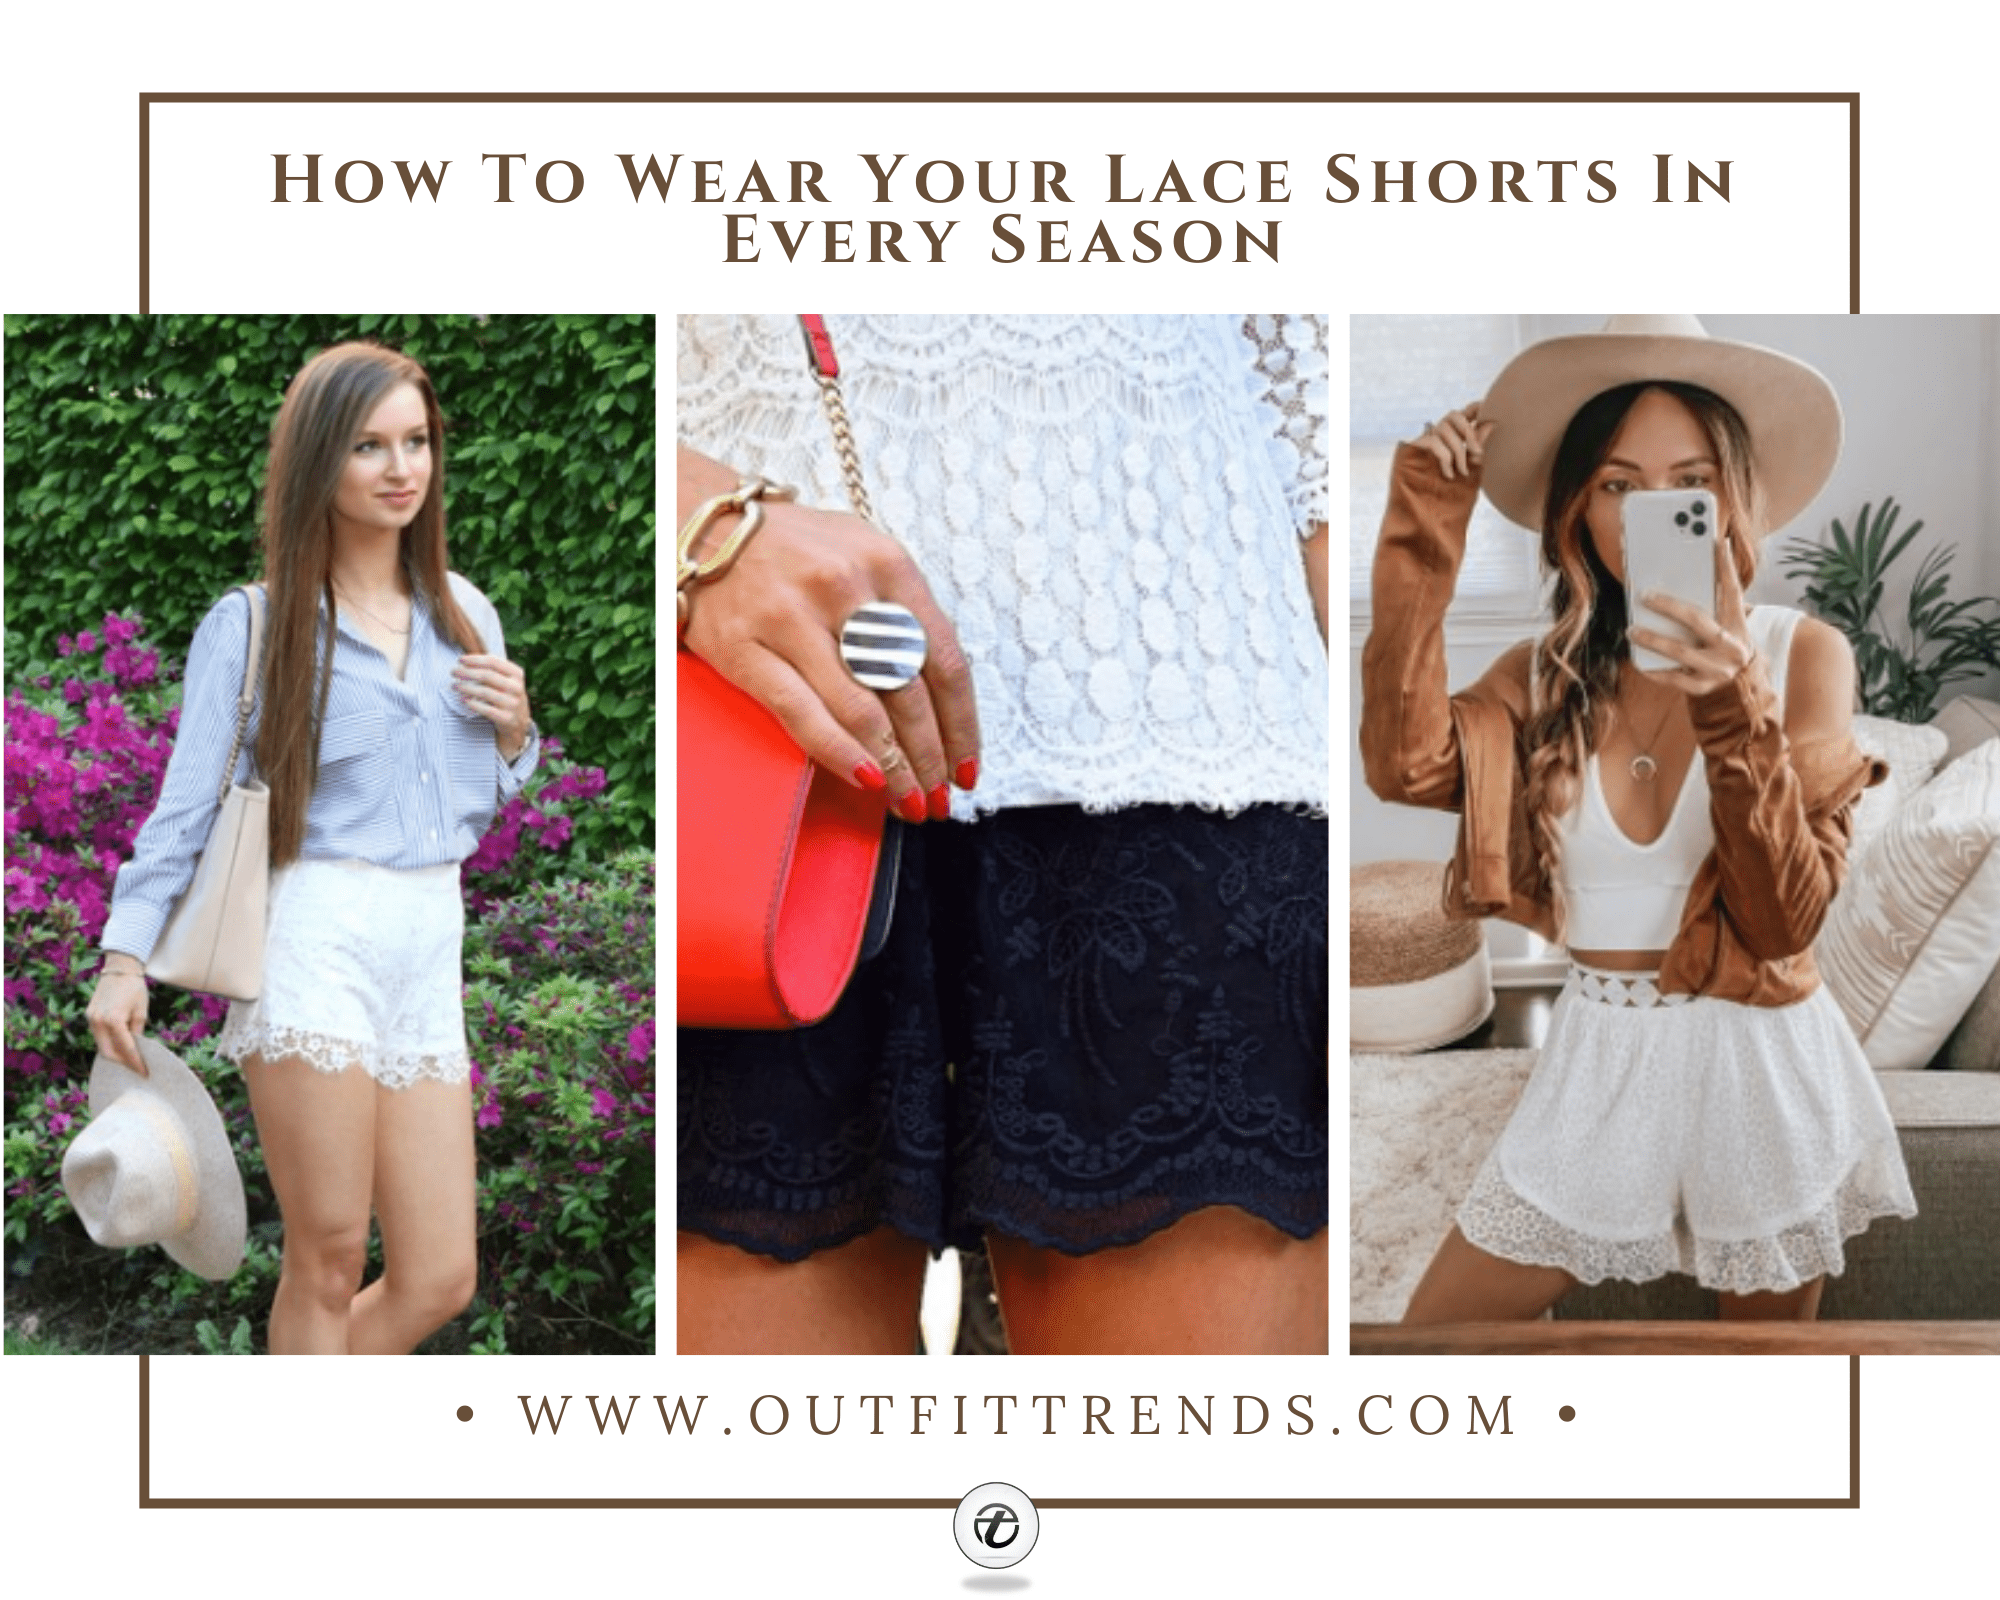 Cute Outfits With Lace Shorts – 20 Ways To Wear Lace Shorts